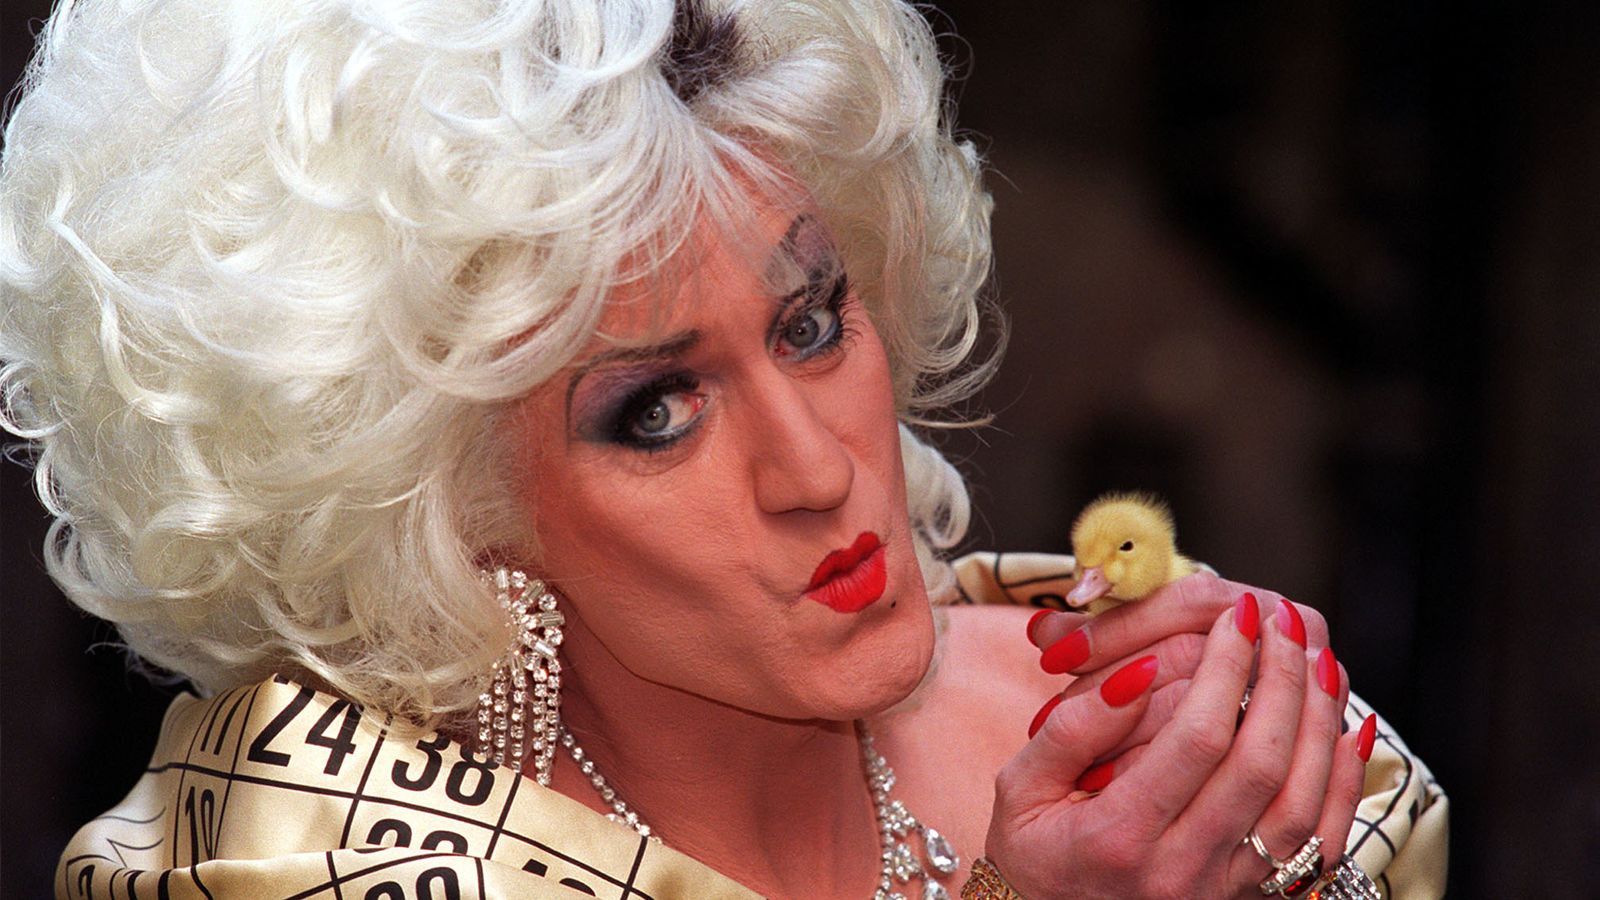 Paul O'Grady: Royal Vauxhall Tavern cabaret club where Lily Savage rose to fame pays raucous tribute to star